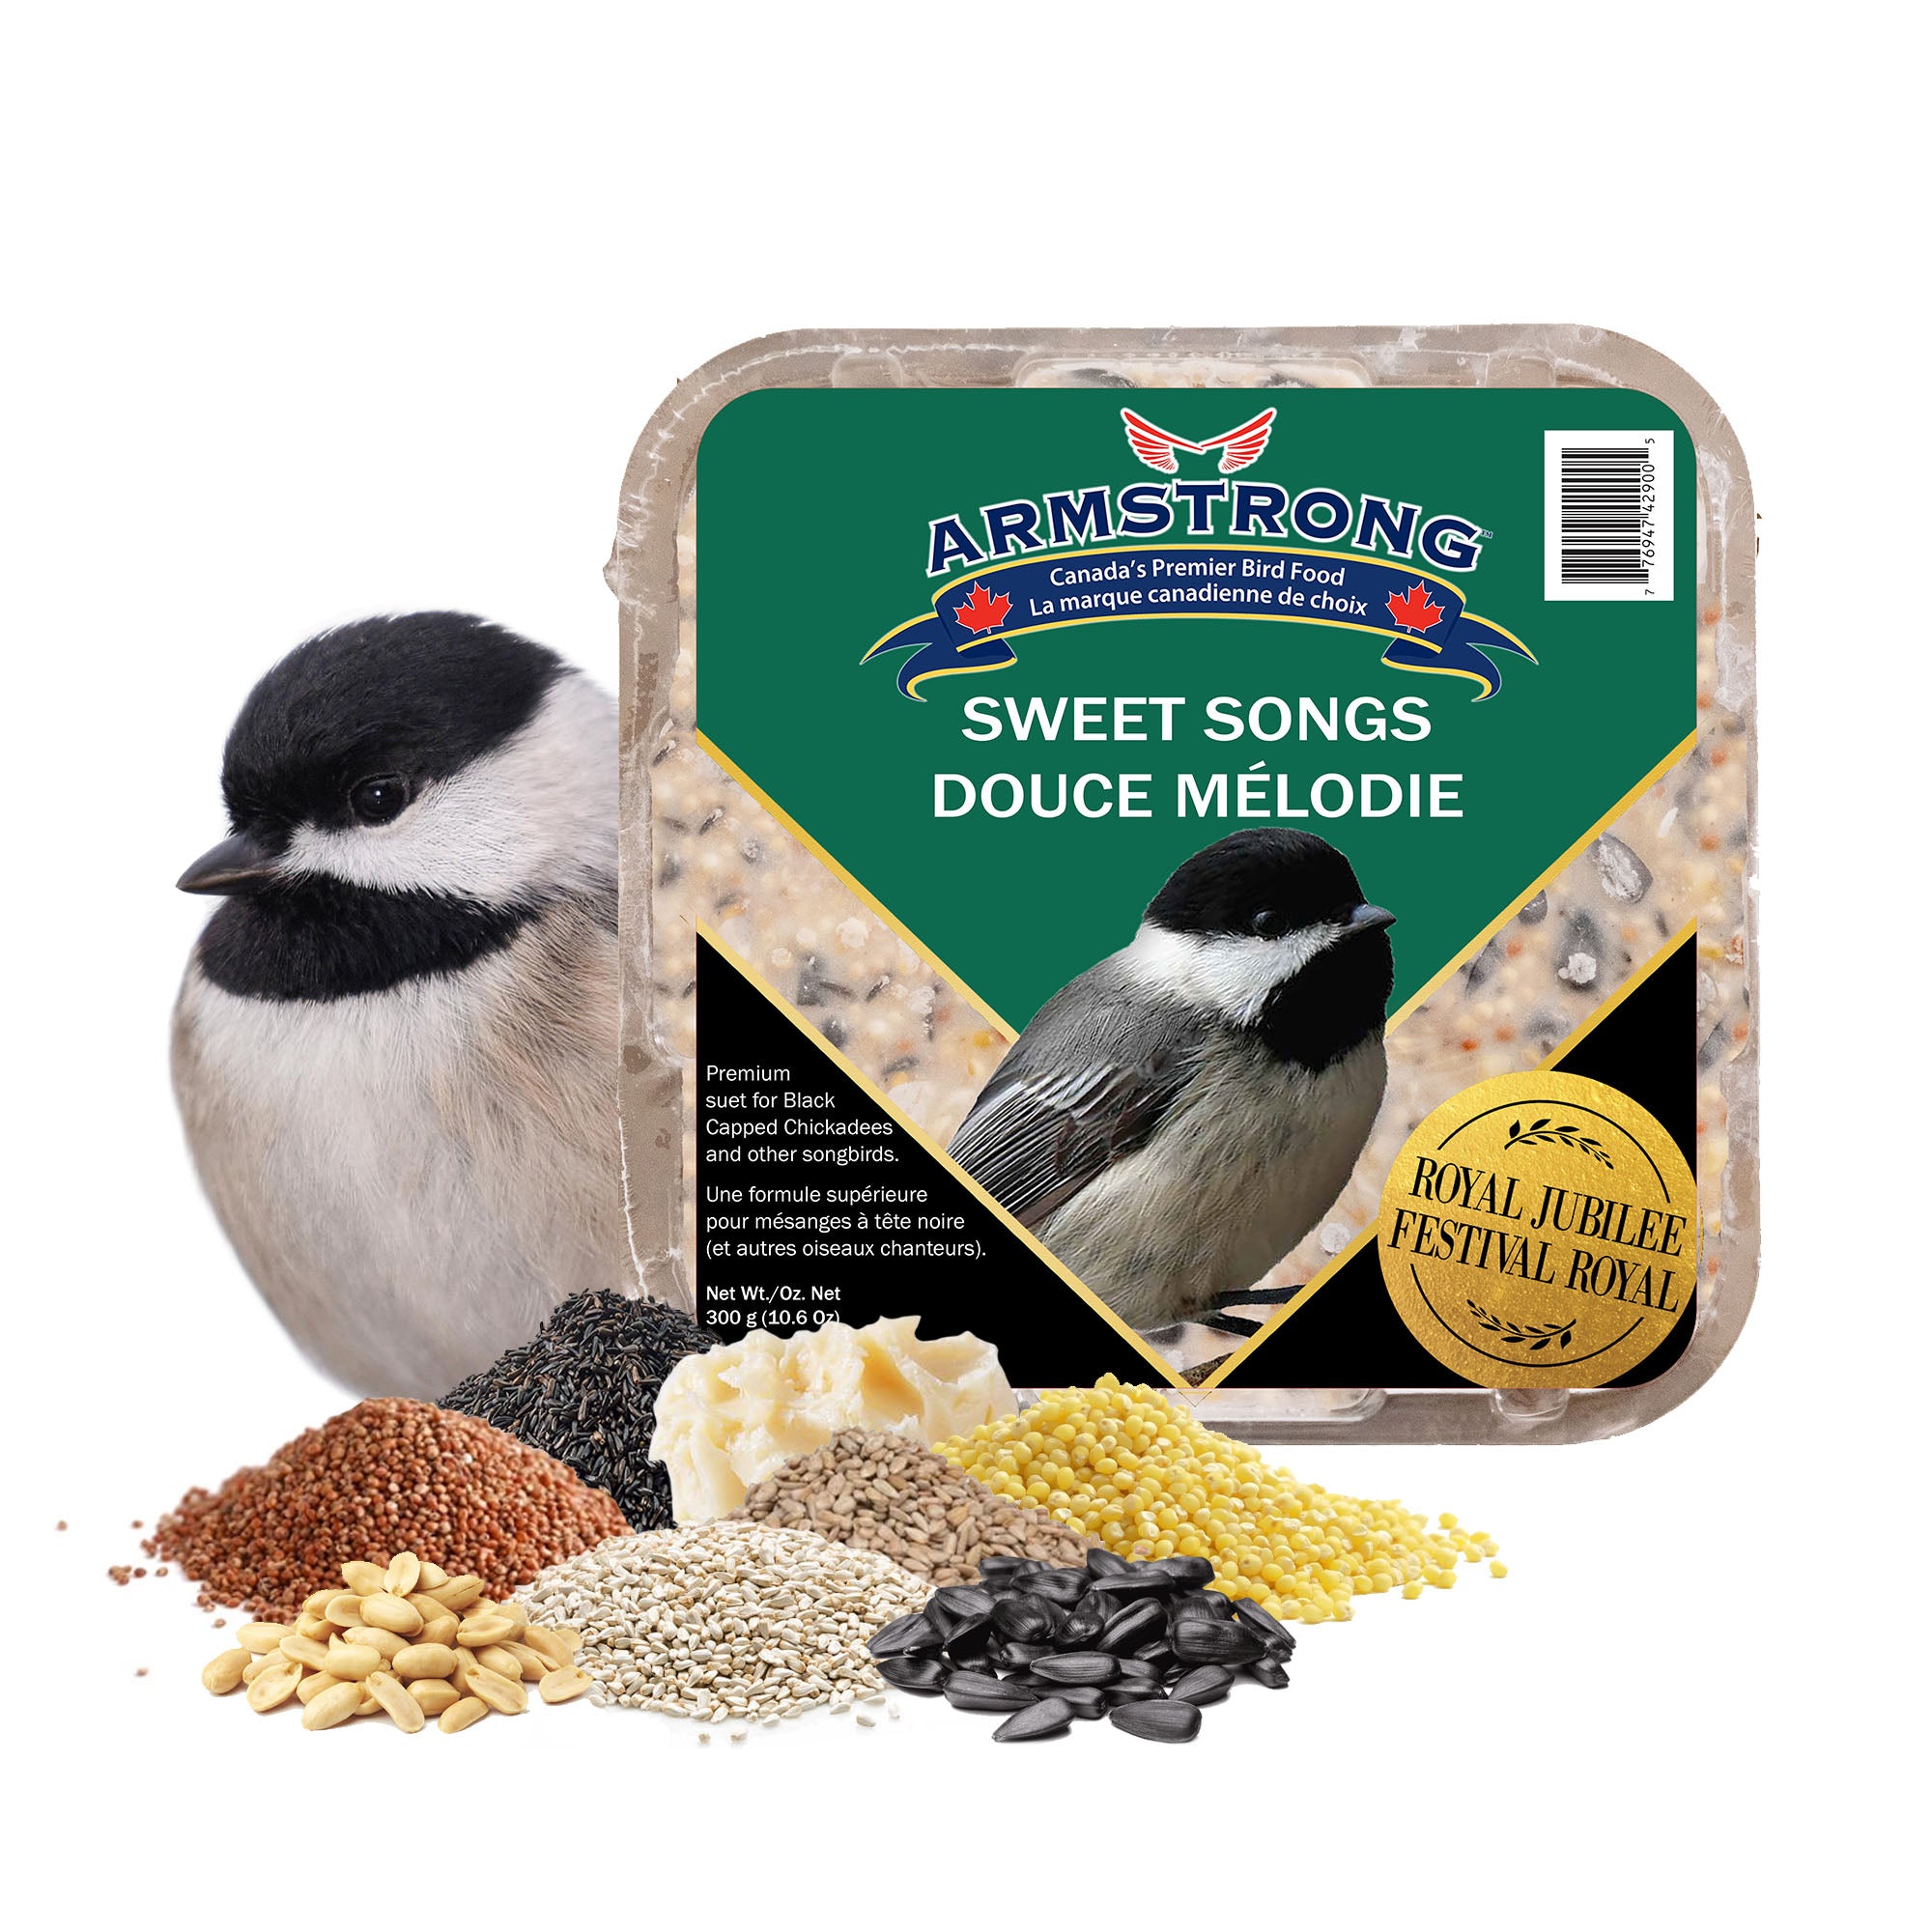 Armstrong Wild Bird Food Royal Jubilee Sweet Songs Suet Blend for Songbirds, 10.6oz (Pack of 3)